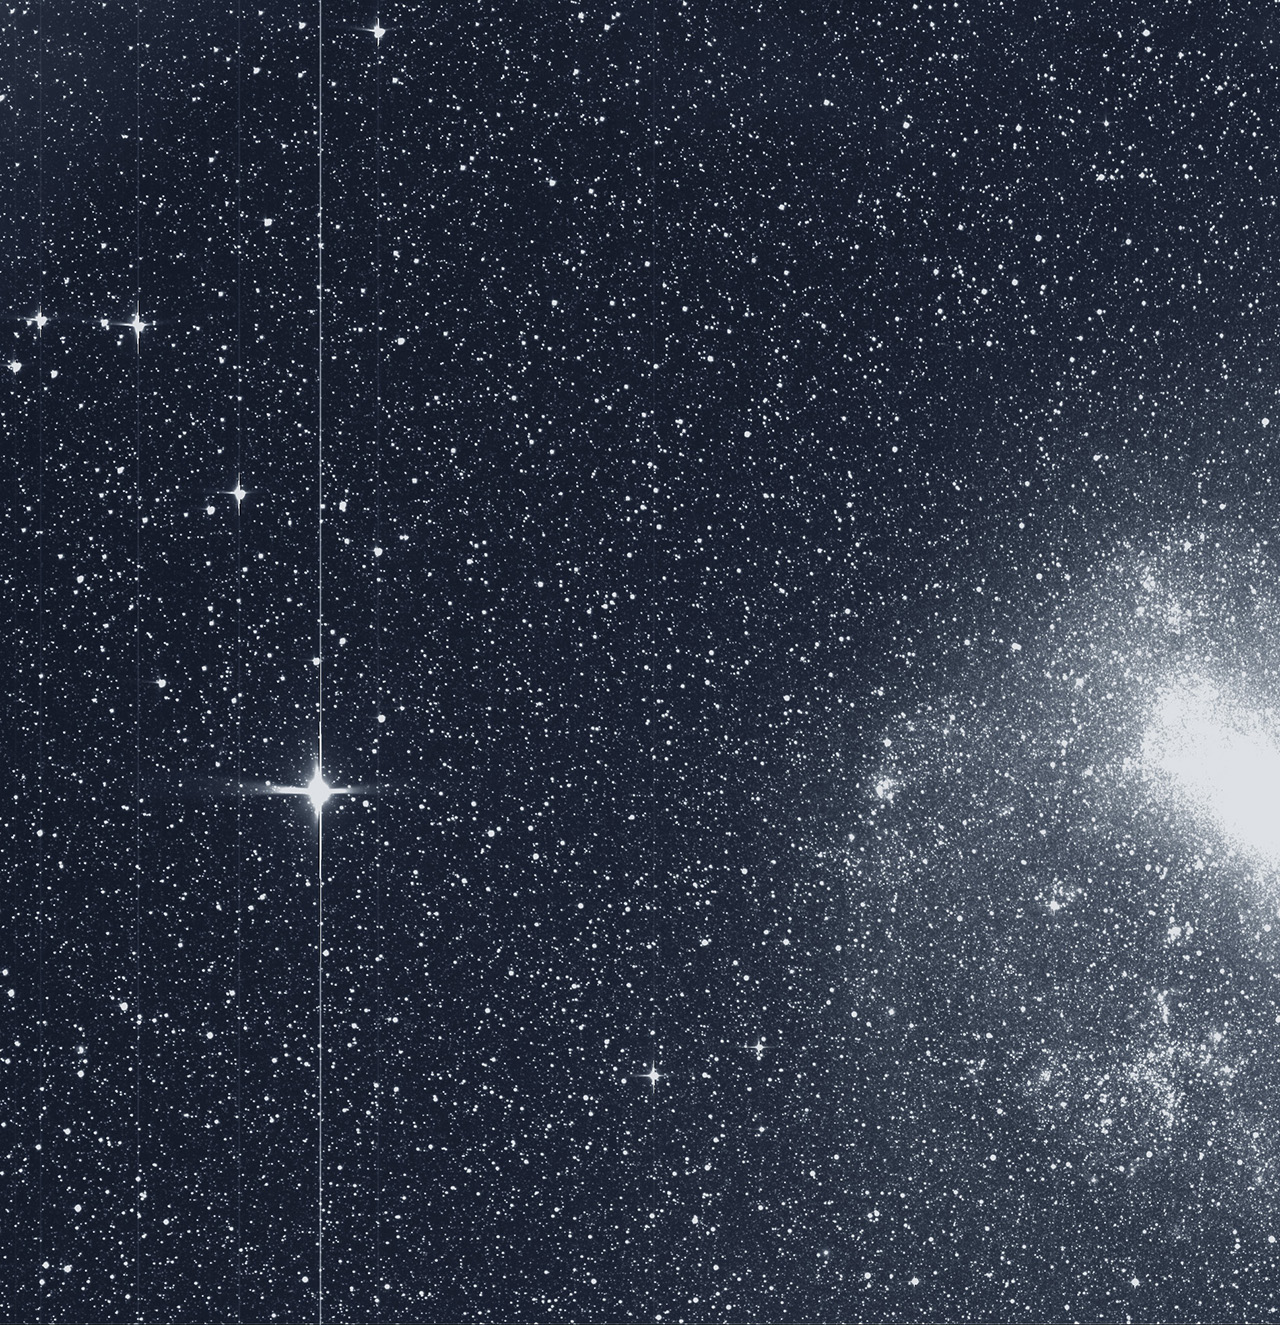 TESS image of Large Magellanic Cloud, right, and the star R Doradus, left